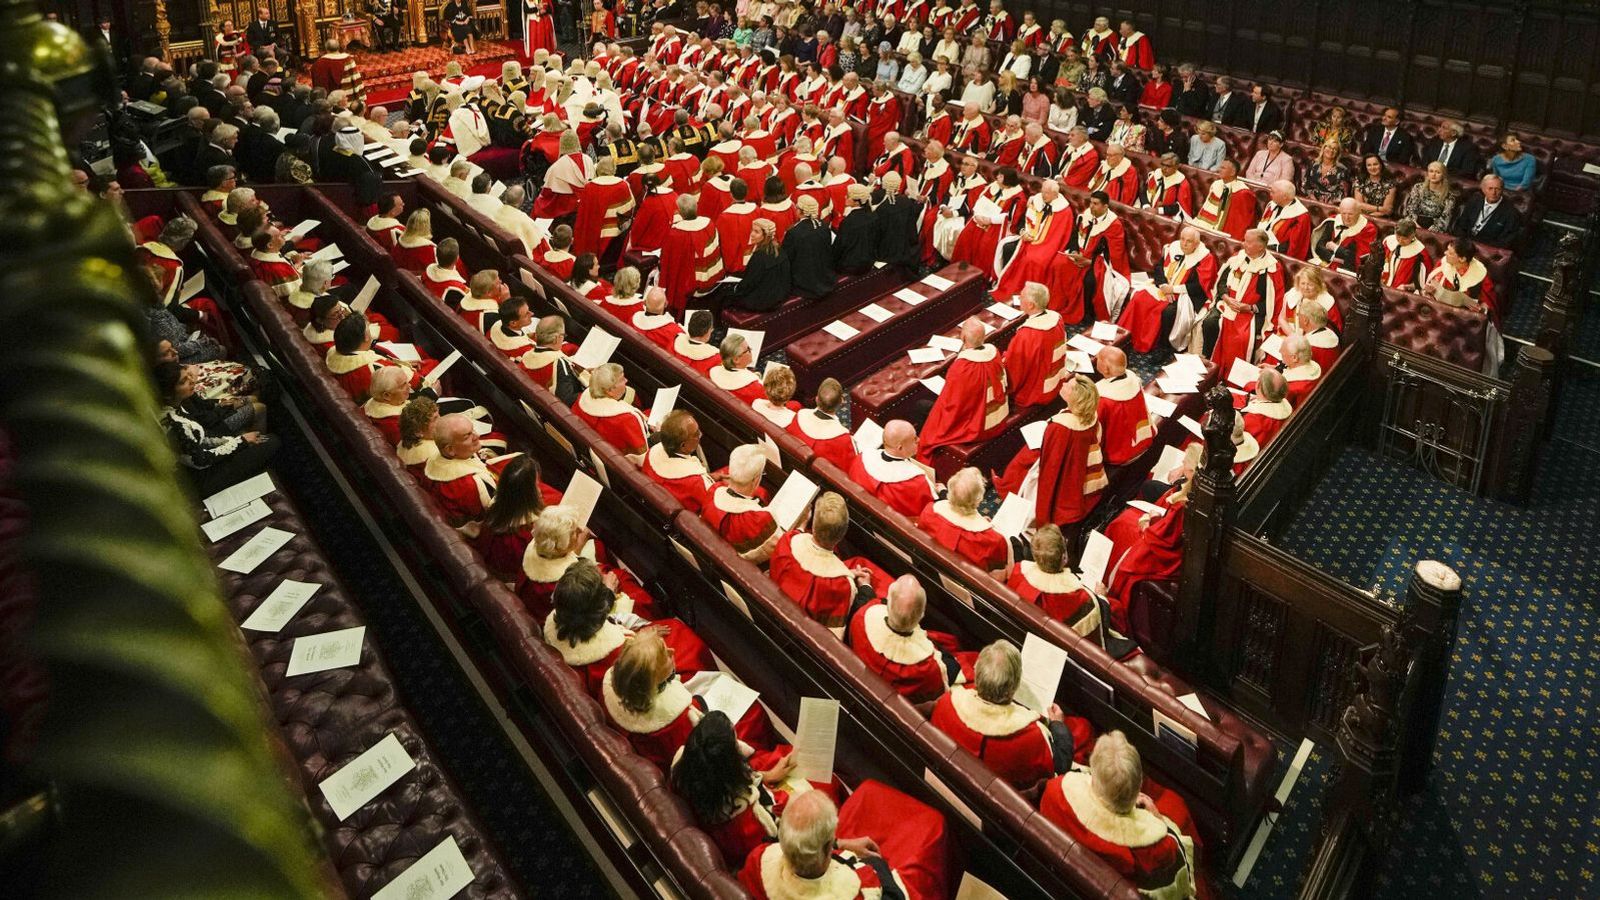 Labour will create new democratic second chamber as current House of Lords set-up 'indefensible', says Gordon Brown